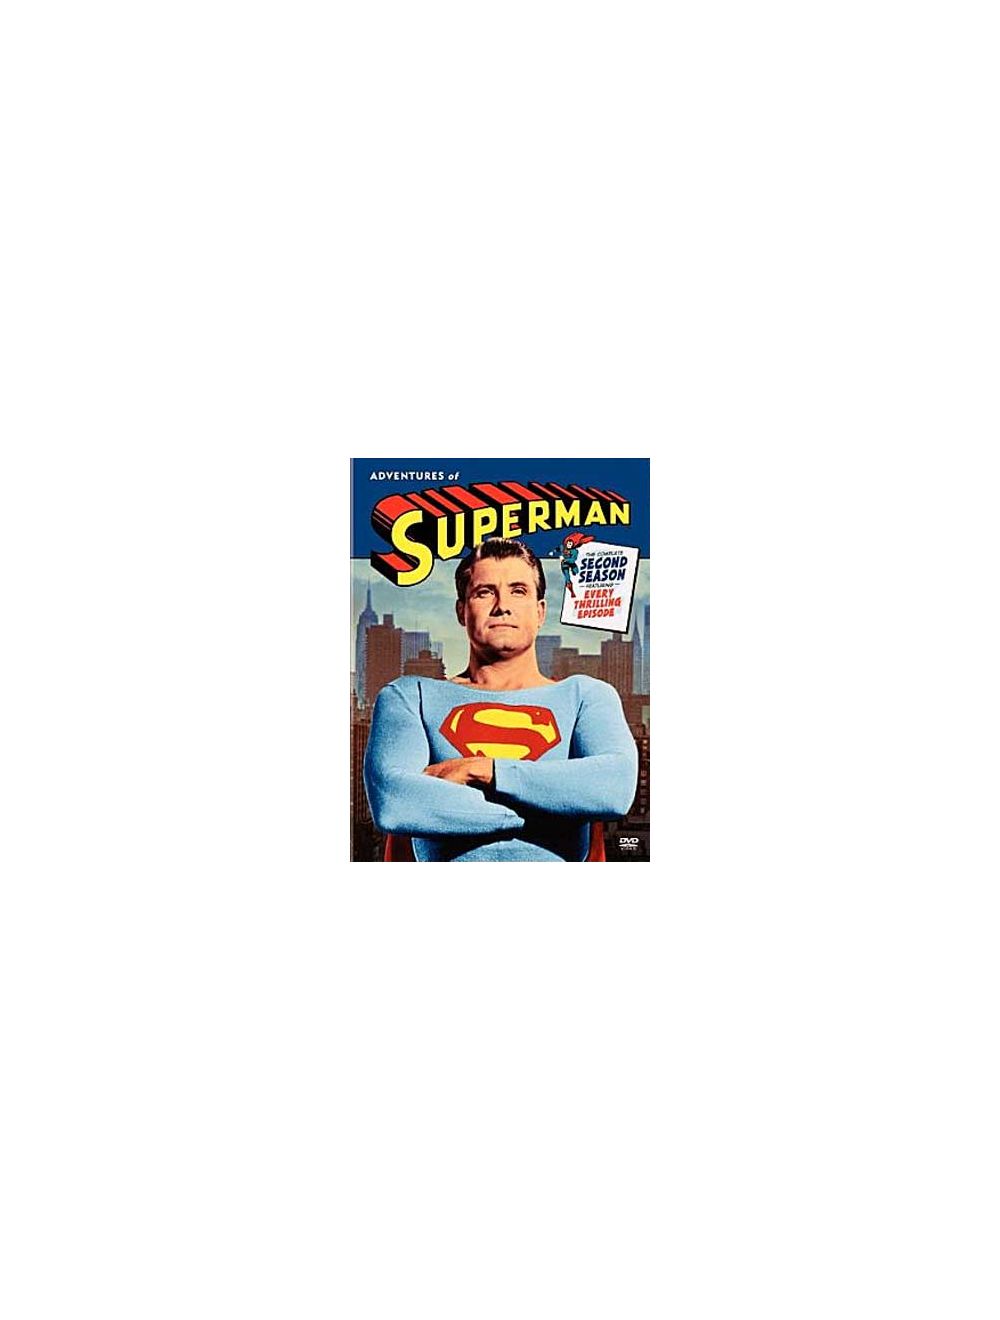 Adventures Of Superman: The Complete Second Season (1953) DVD - Loving The Classics